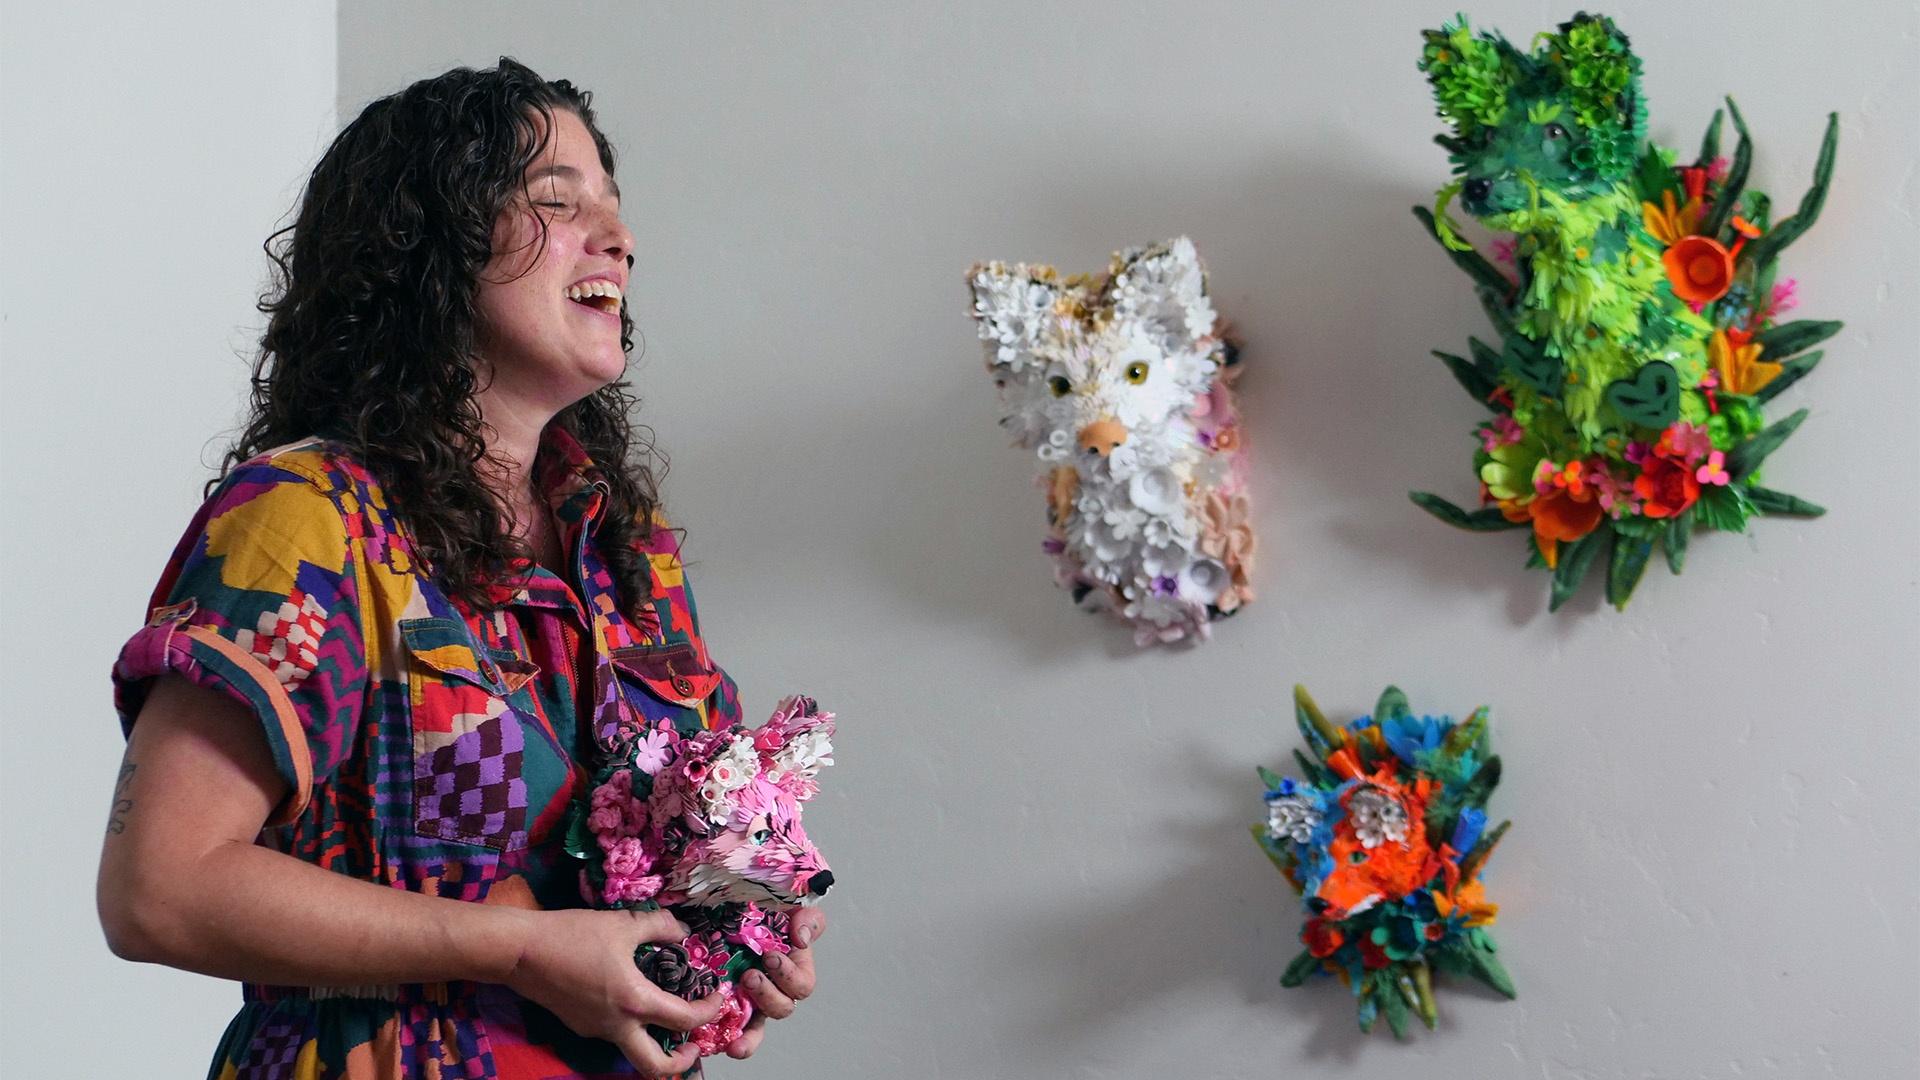 Artist Calder Kamin wearing colorful jumpsuit holds one of her sculptures made of recycled plastic